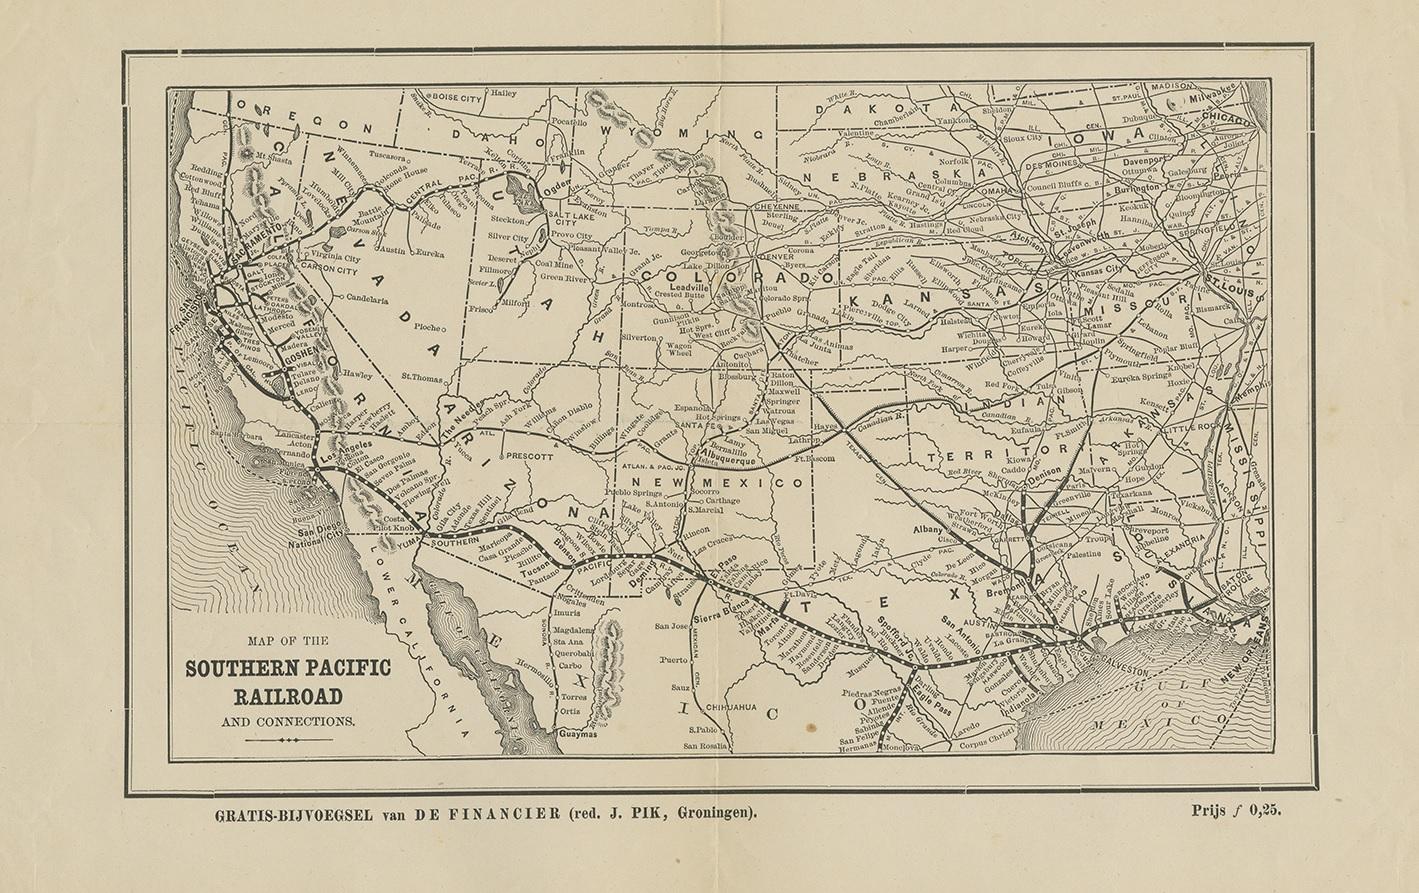 Antique map titled 'Map of the Southern Pacific Railroad and connections'. Founded in 1865 by a group of businessmen in San Francisco, the Southern Pacific was created as a rail line from San Francisco to San Diego. By 1883, the line extended all